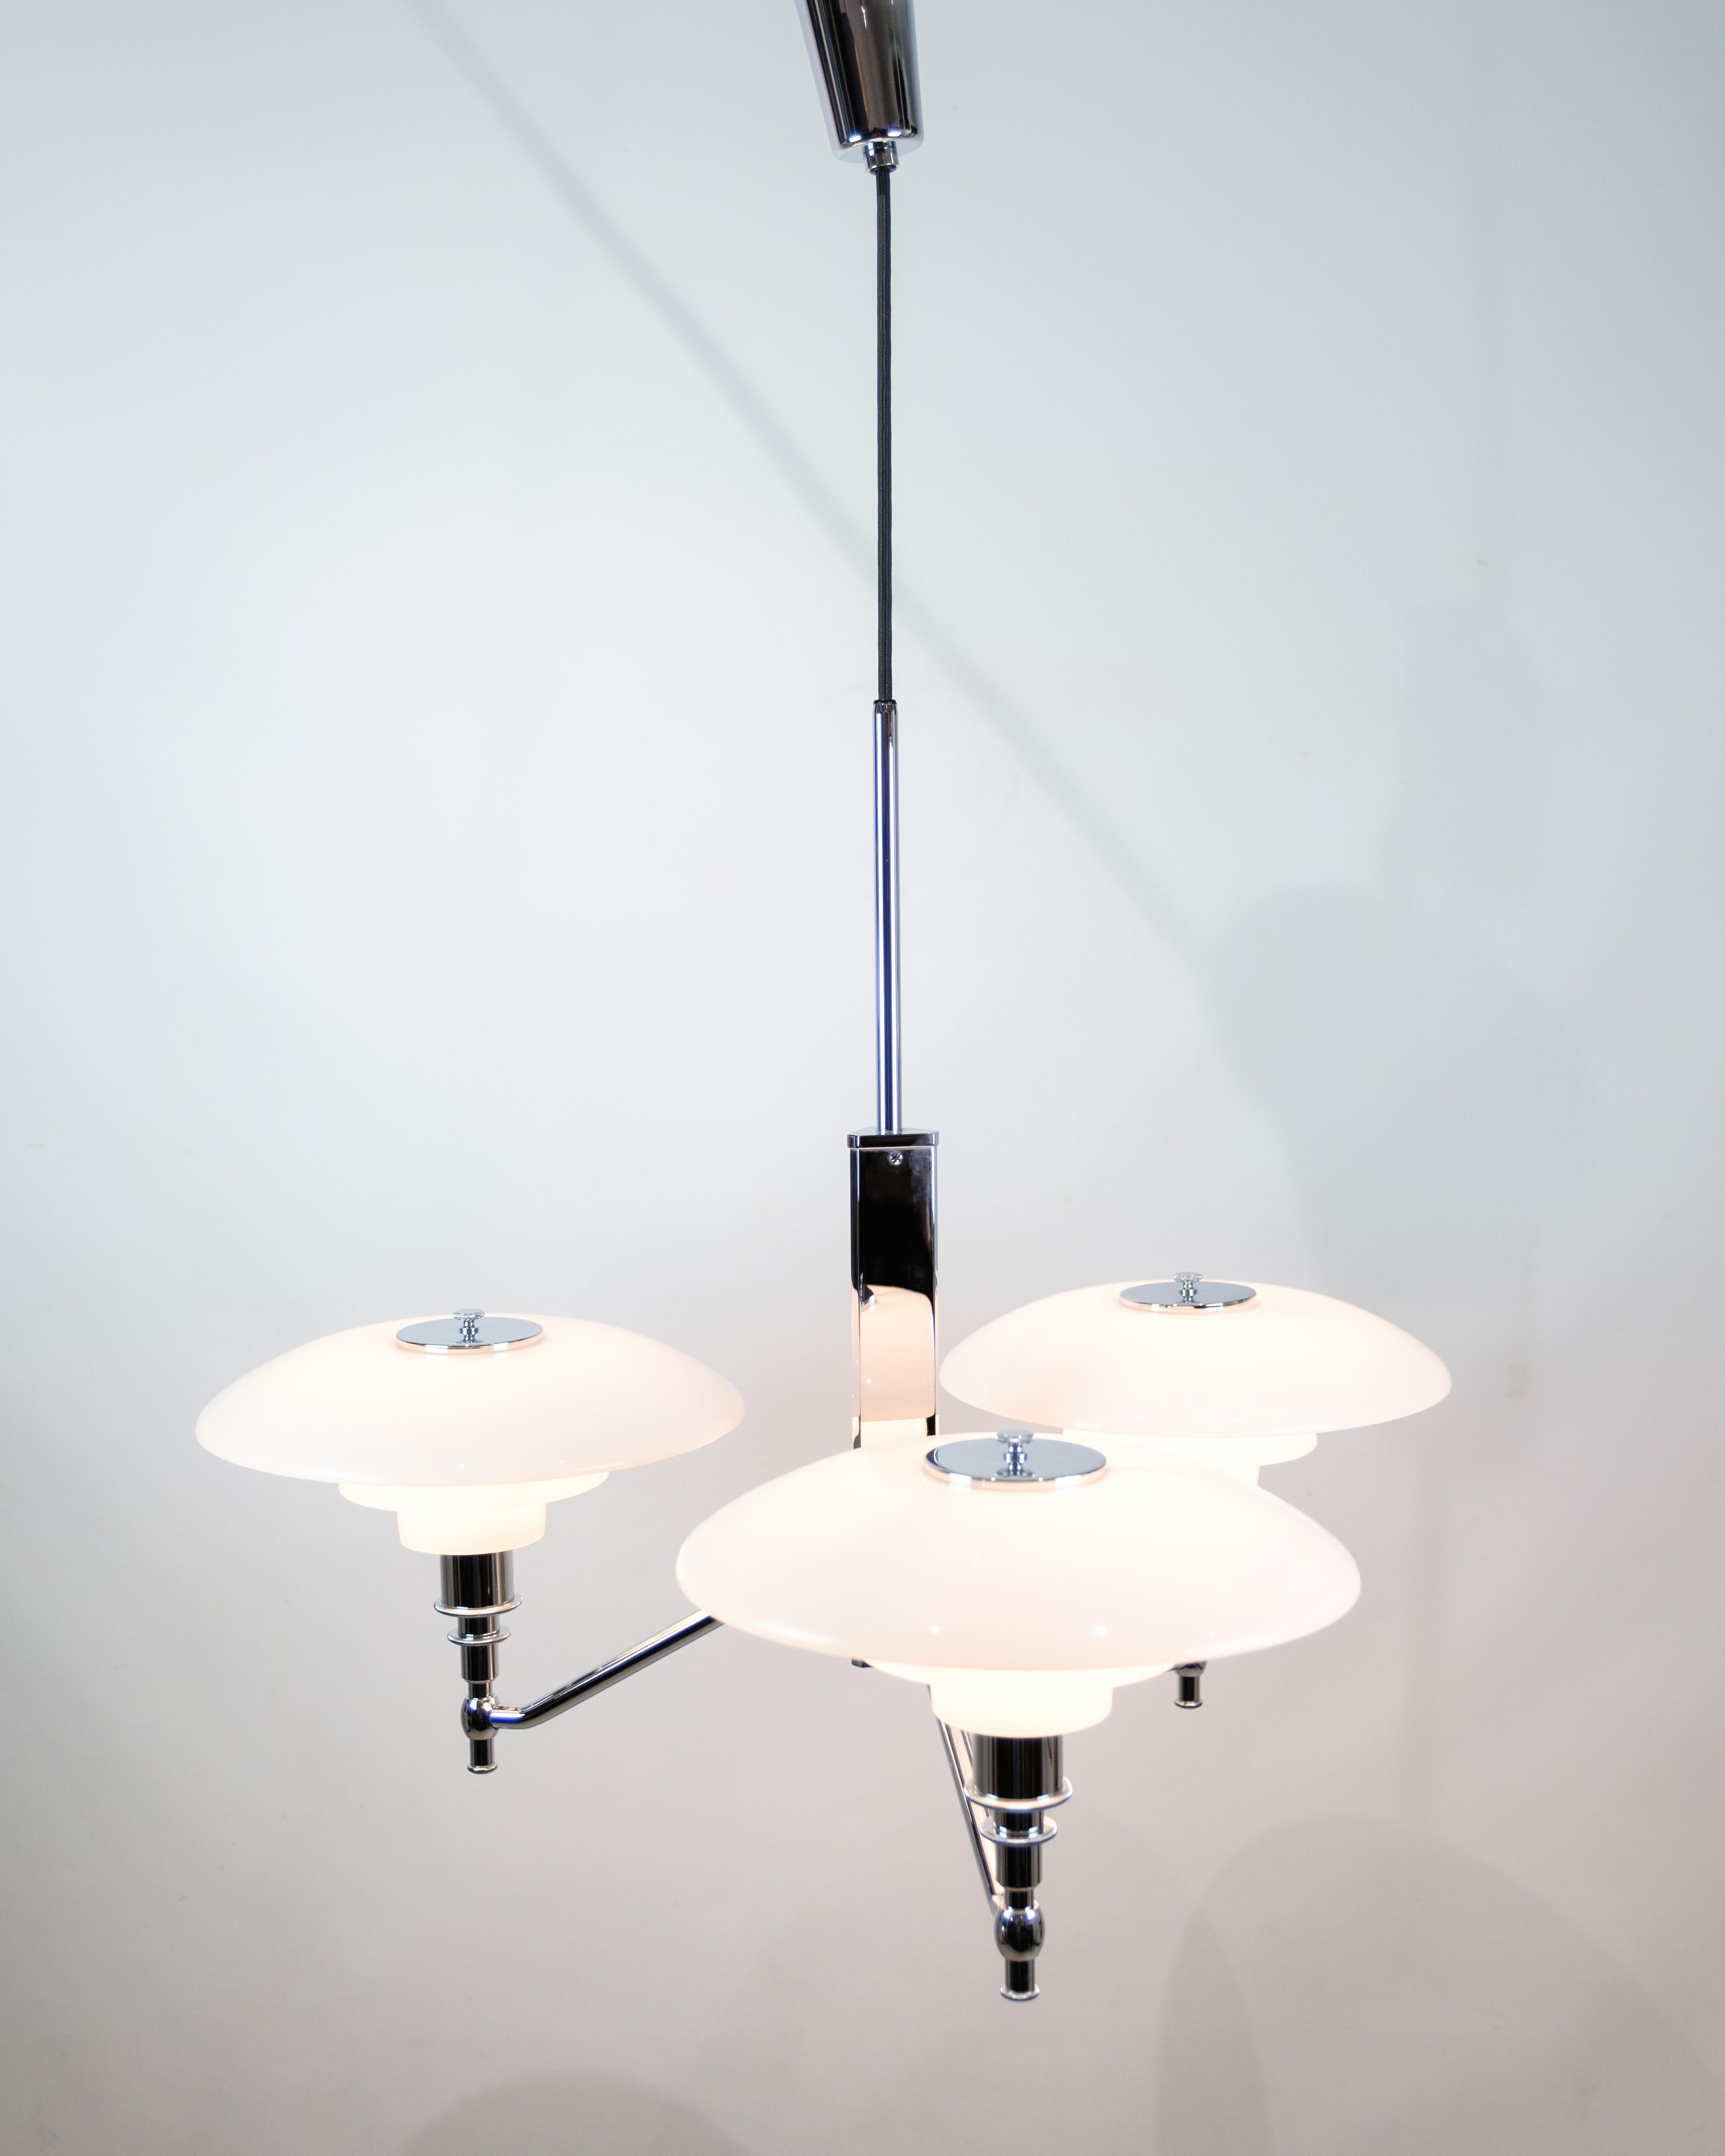 The PH 3/2 Academy crown, designed by Poul Henningsen in 1925-1926 and launched in 2000, is a testament to the timeless elegance and innovative design principles of Henningsen's work. Manufactured by Louis Poulsen, this exquisite lighting fixture